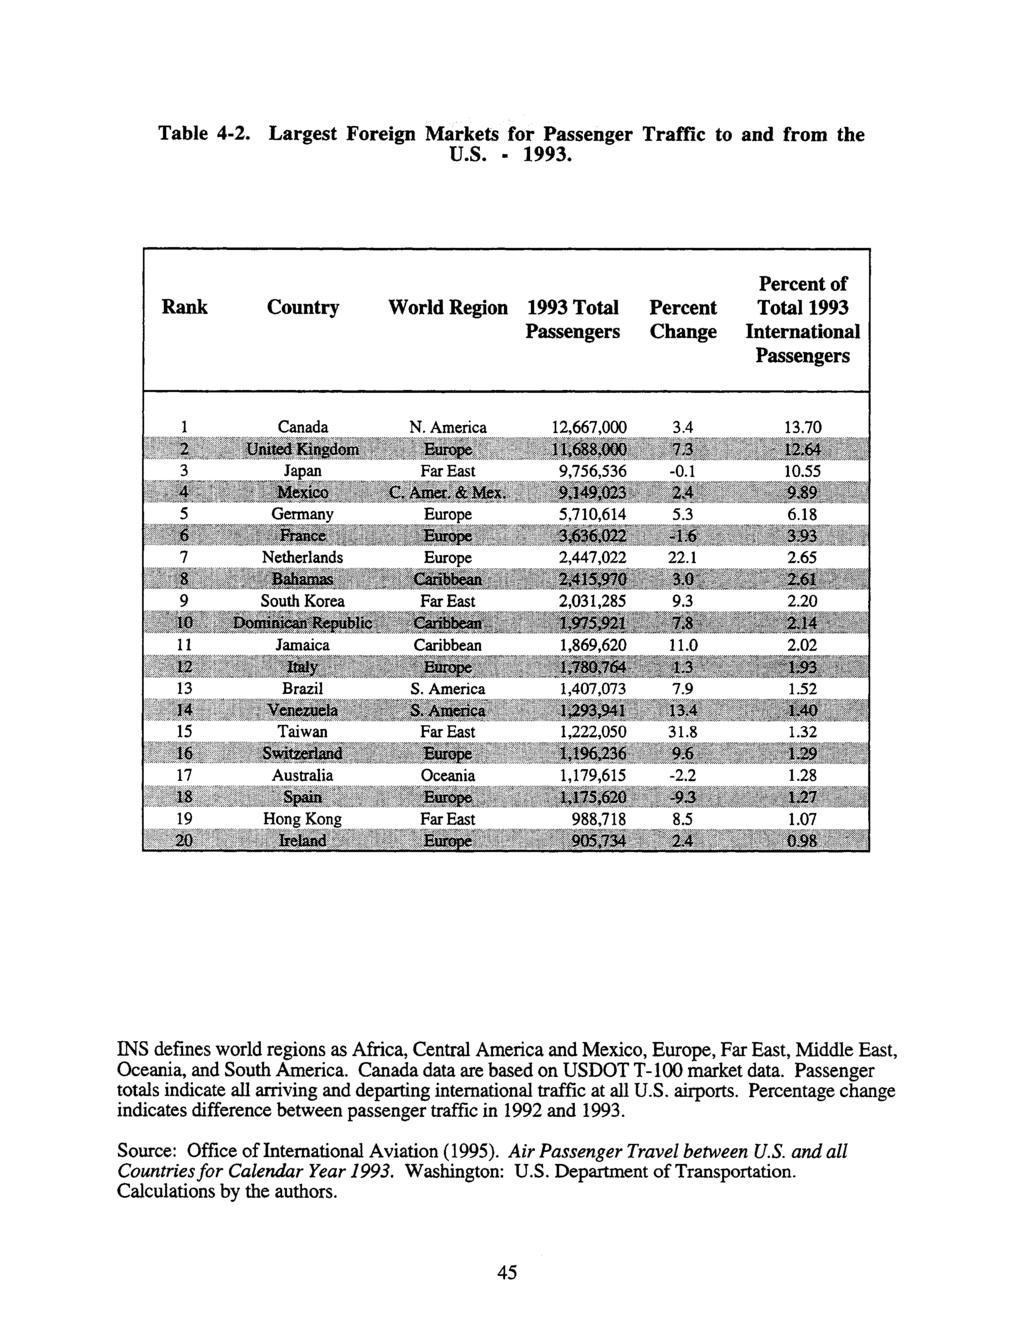 Table 4-2. Largest Foreign Markets for Passenger Traffic to and from the U.S. - 1993.